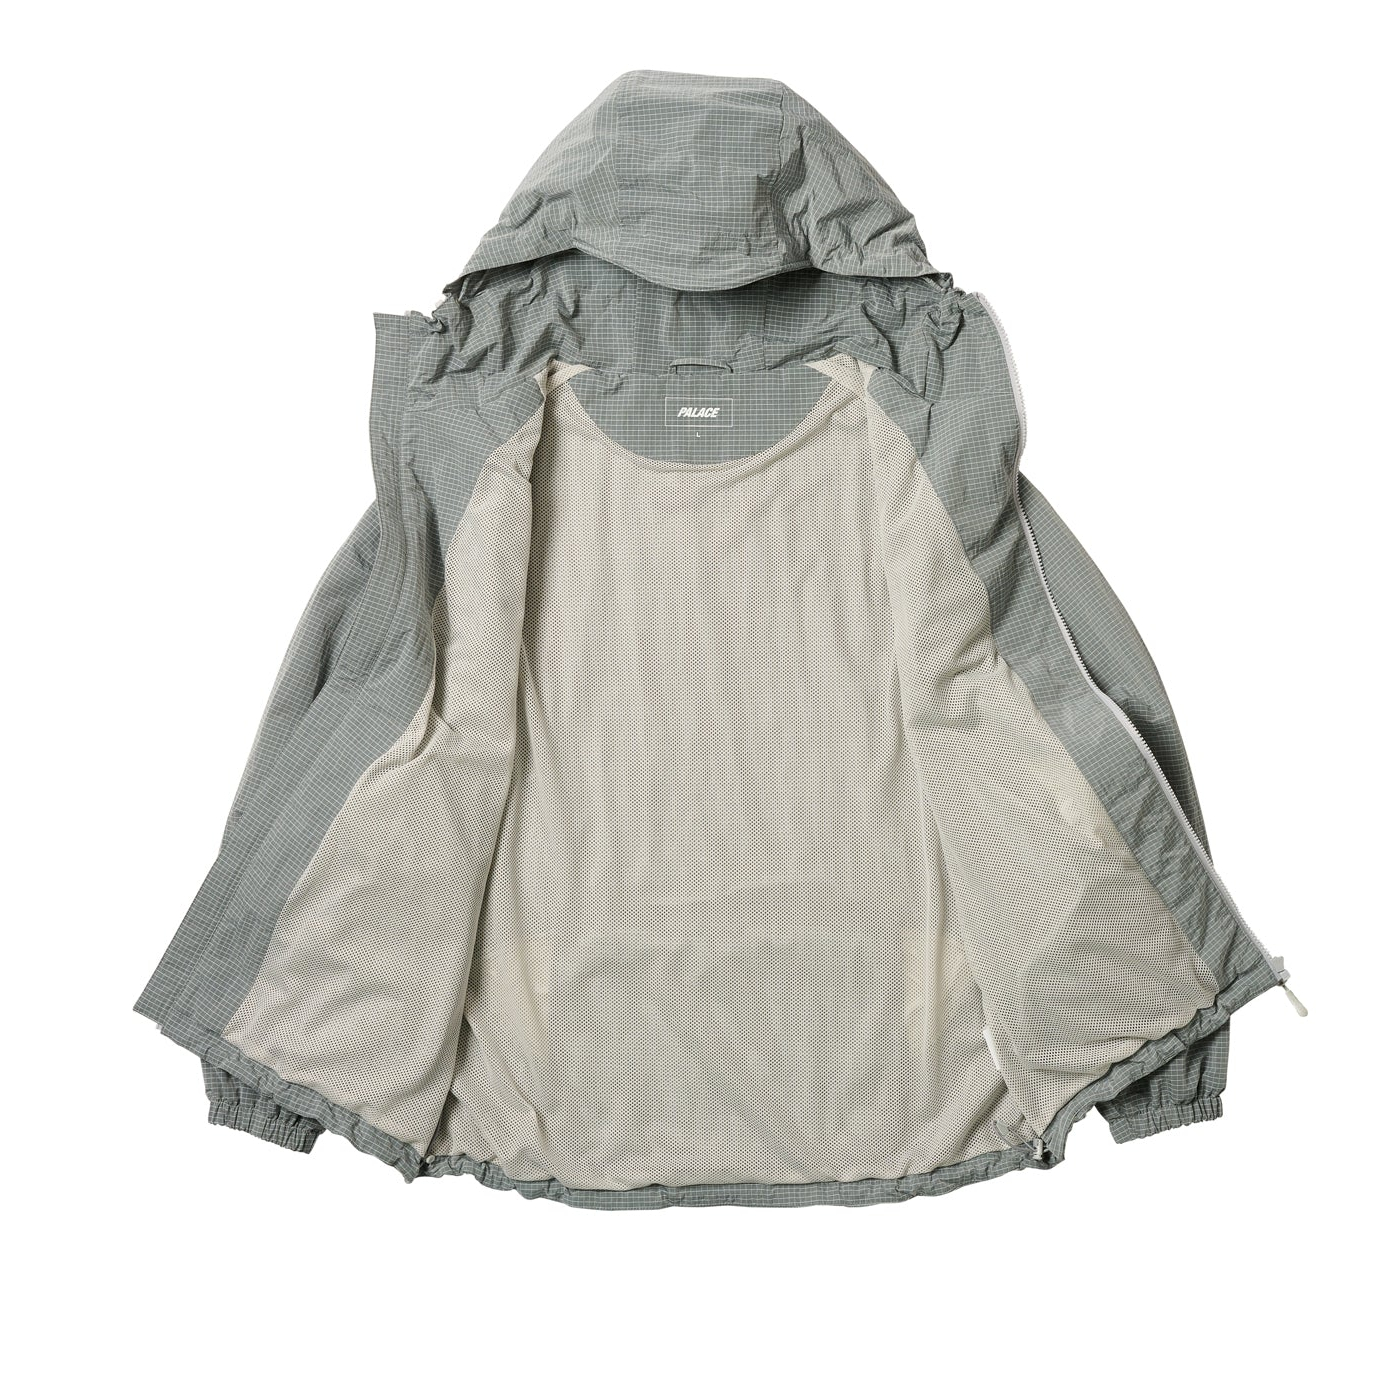 Thumbnail Y-RIPSTOP SHELL JACKET STEEL GREY one color